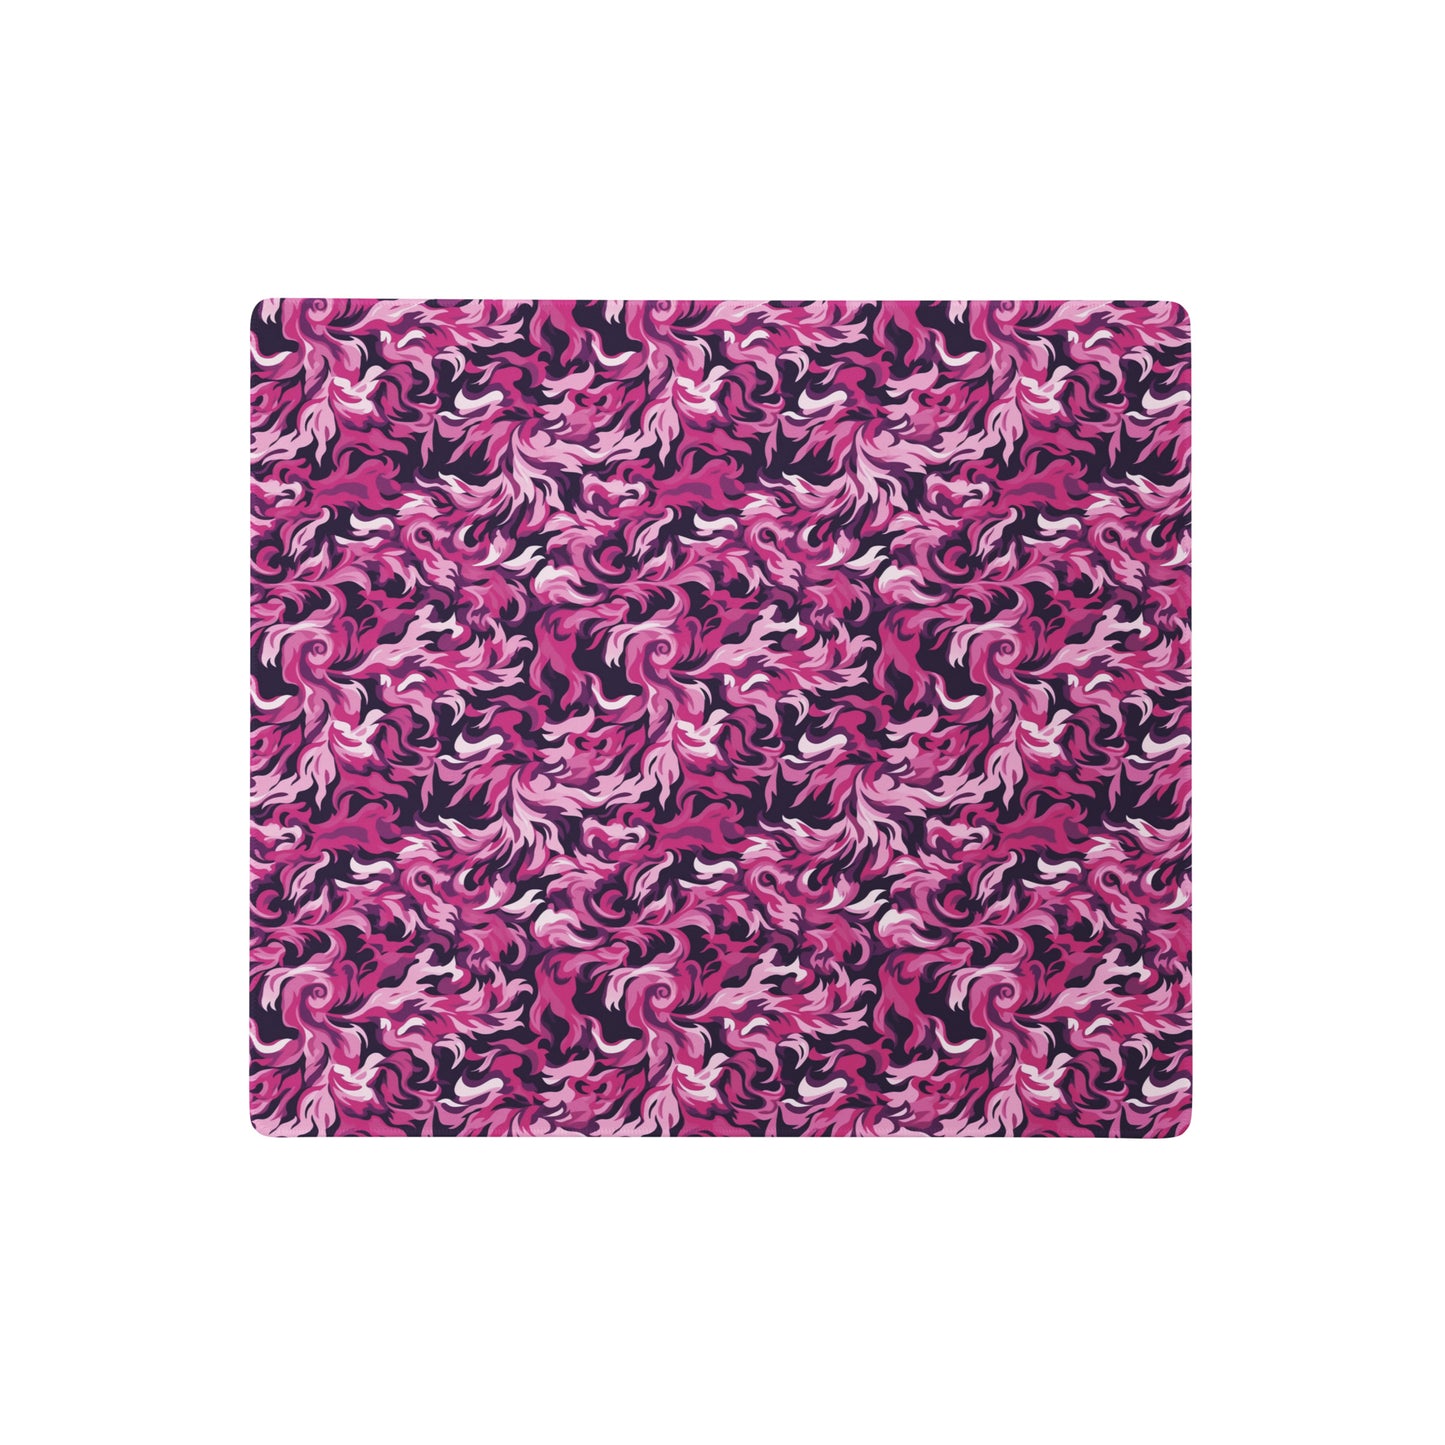 A 18" x 16" desk pad with a pink and magenta camo pattern.